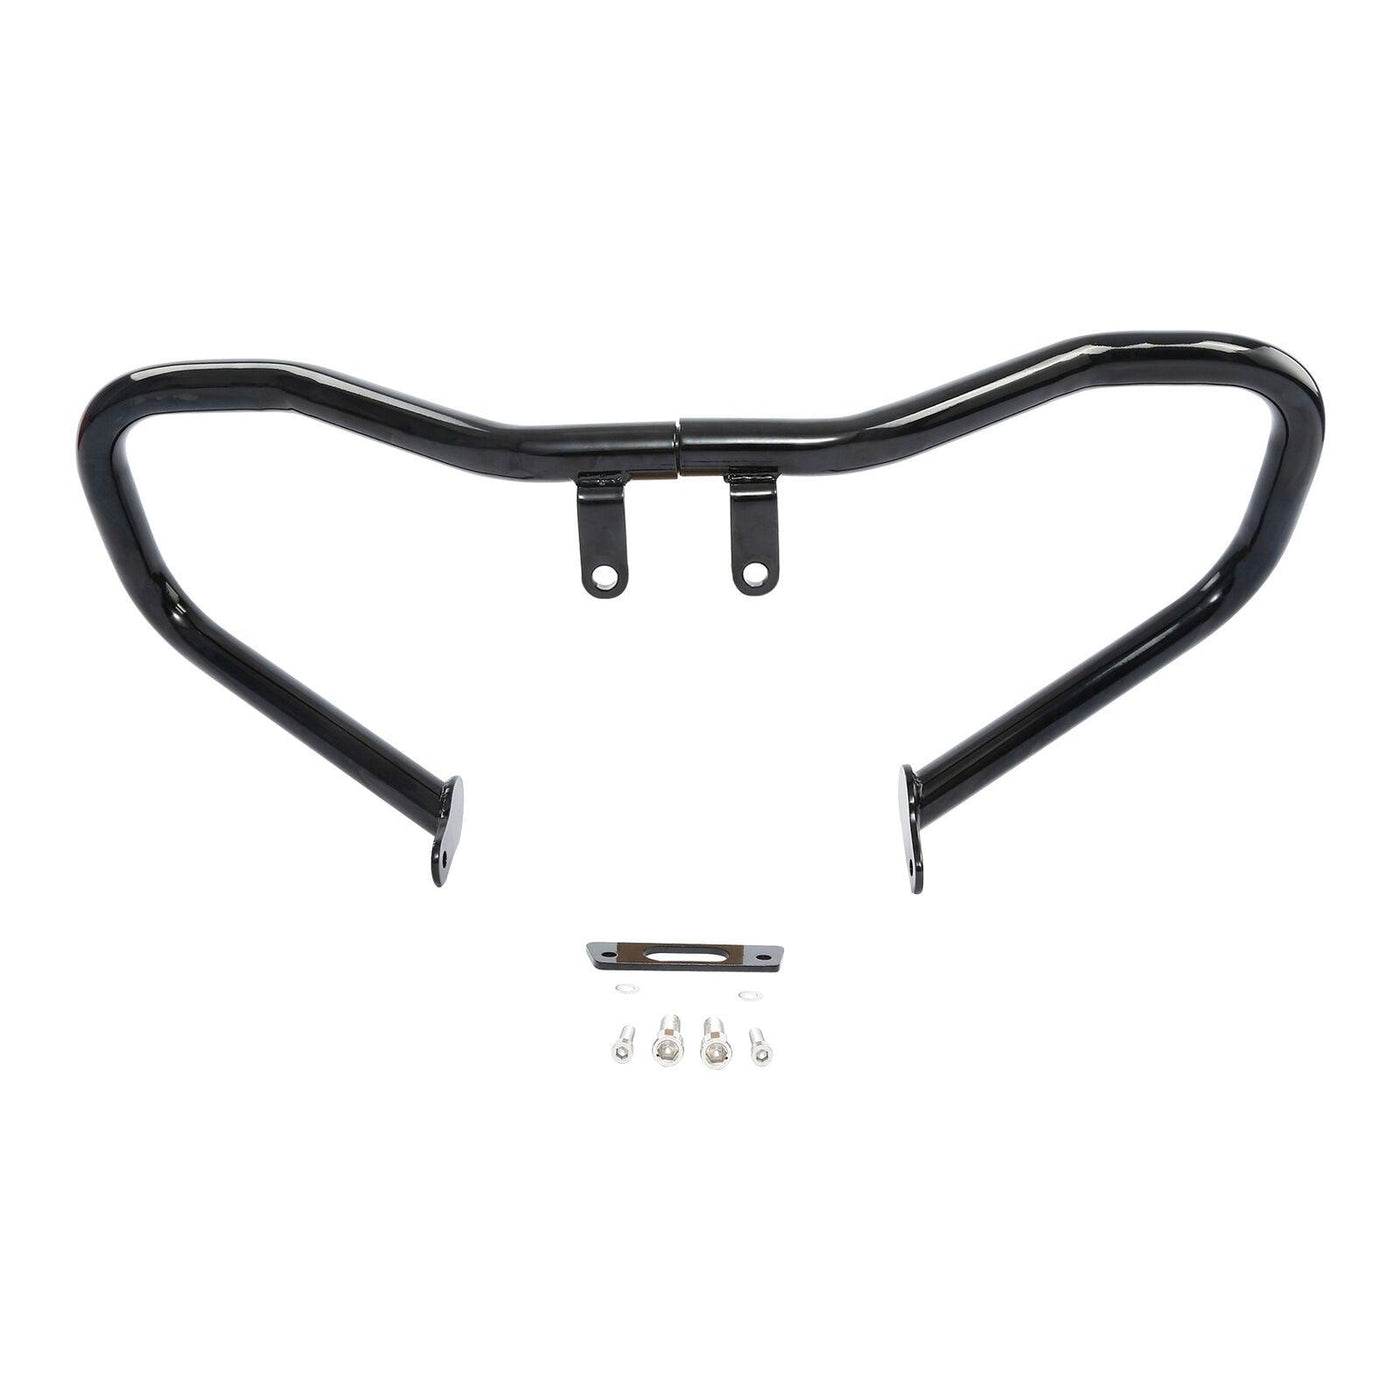 Chopped Engine Guard Highway Crash Bar For Harley Road King Street Glide 2014-Up - Moto Life Products